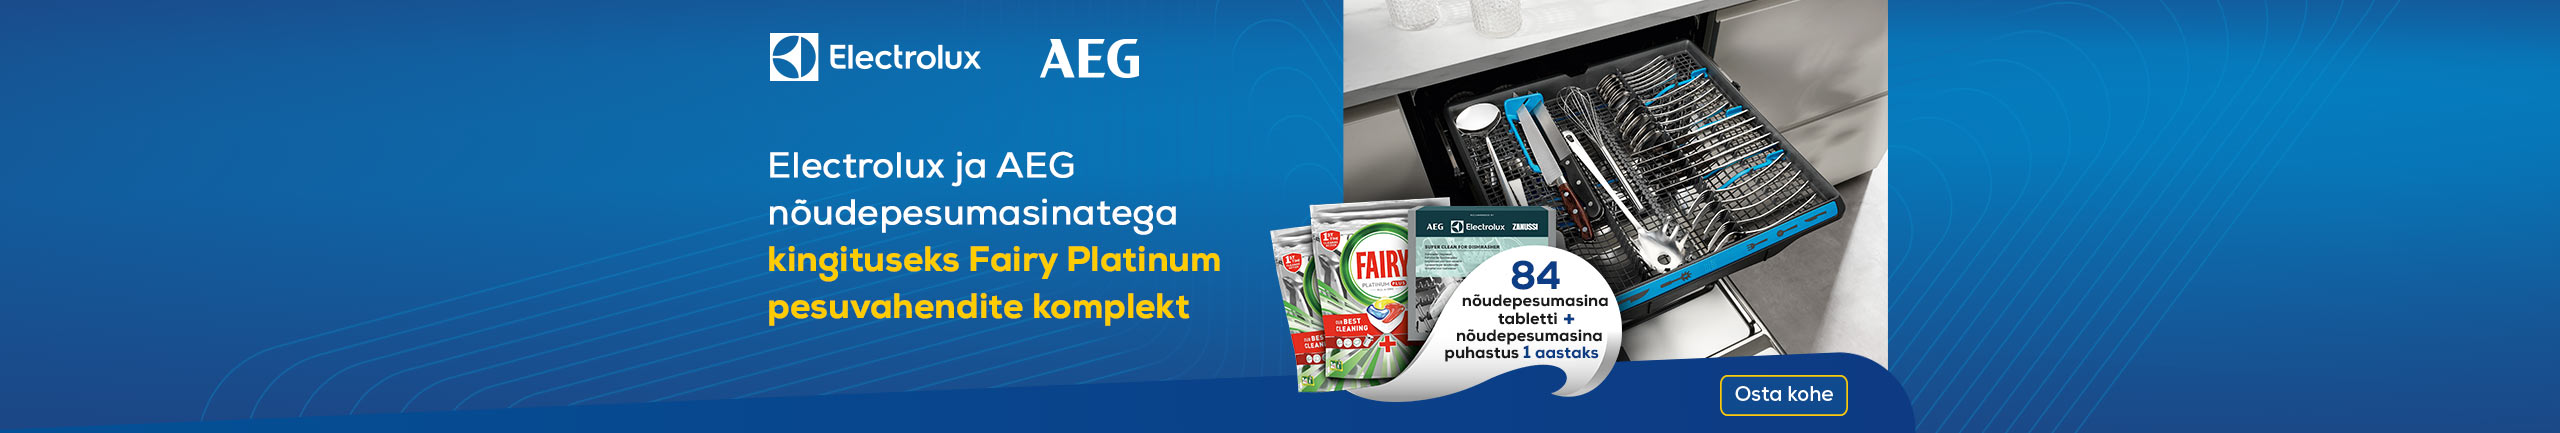 Buy Electrolux or AEG dishwasher and receive a complimentary gift